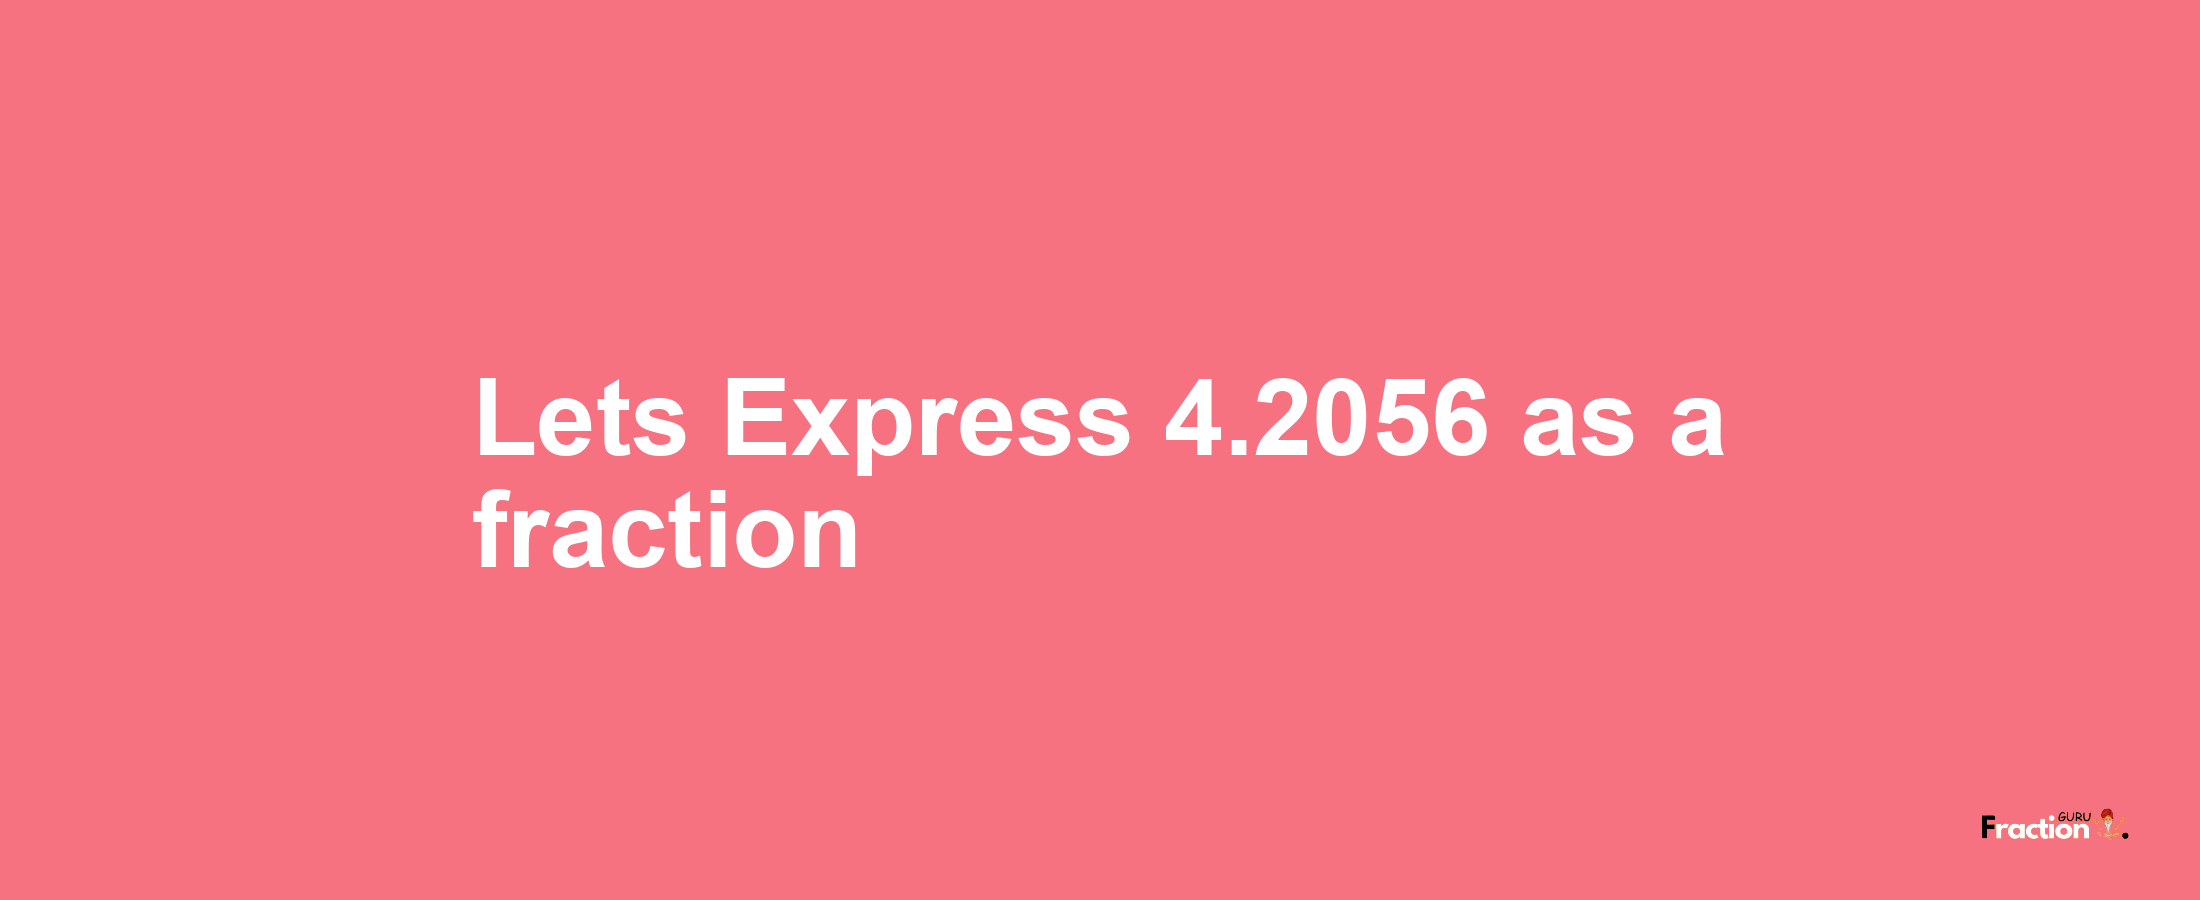 Lets Express 4.2056 as afraction